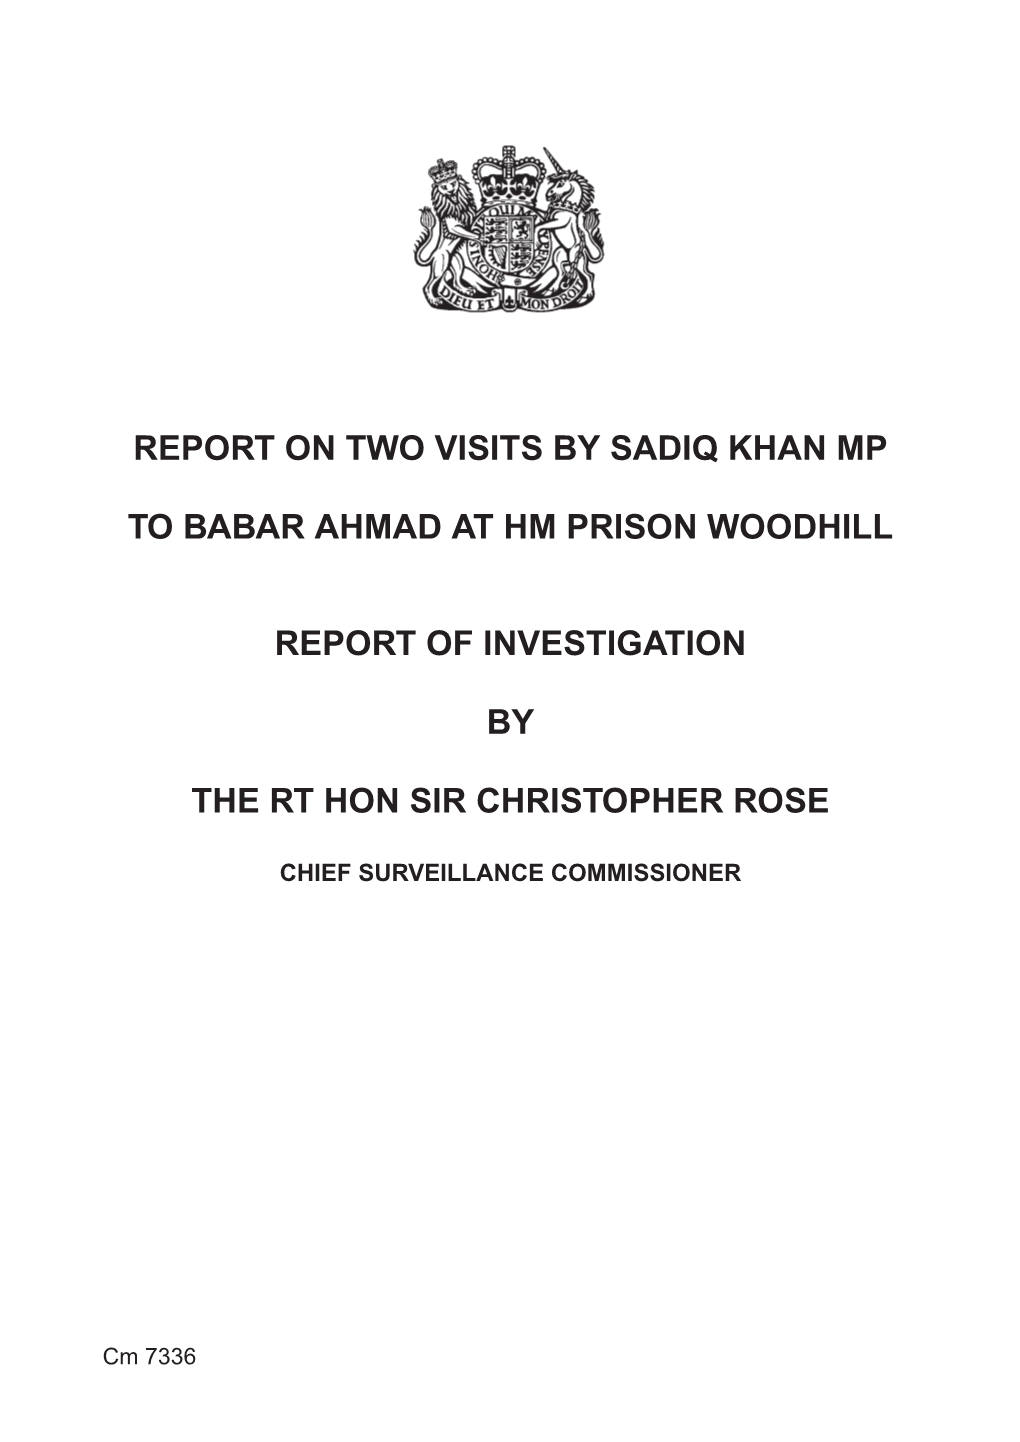 Report on Two Visits by Sadiq Khan Mp to Babar Ahmad at Hm Prison Woodhill